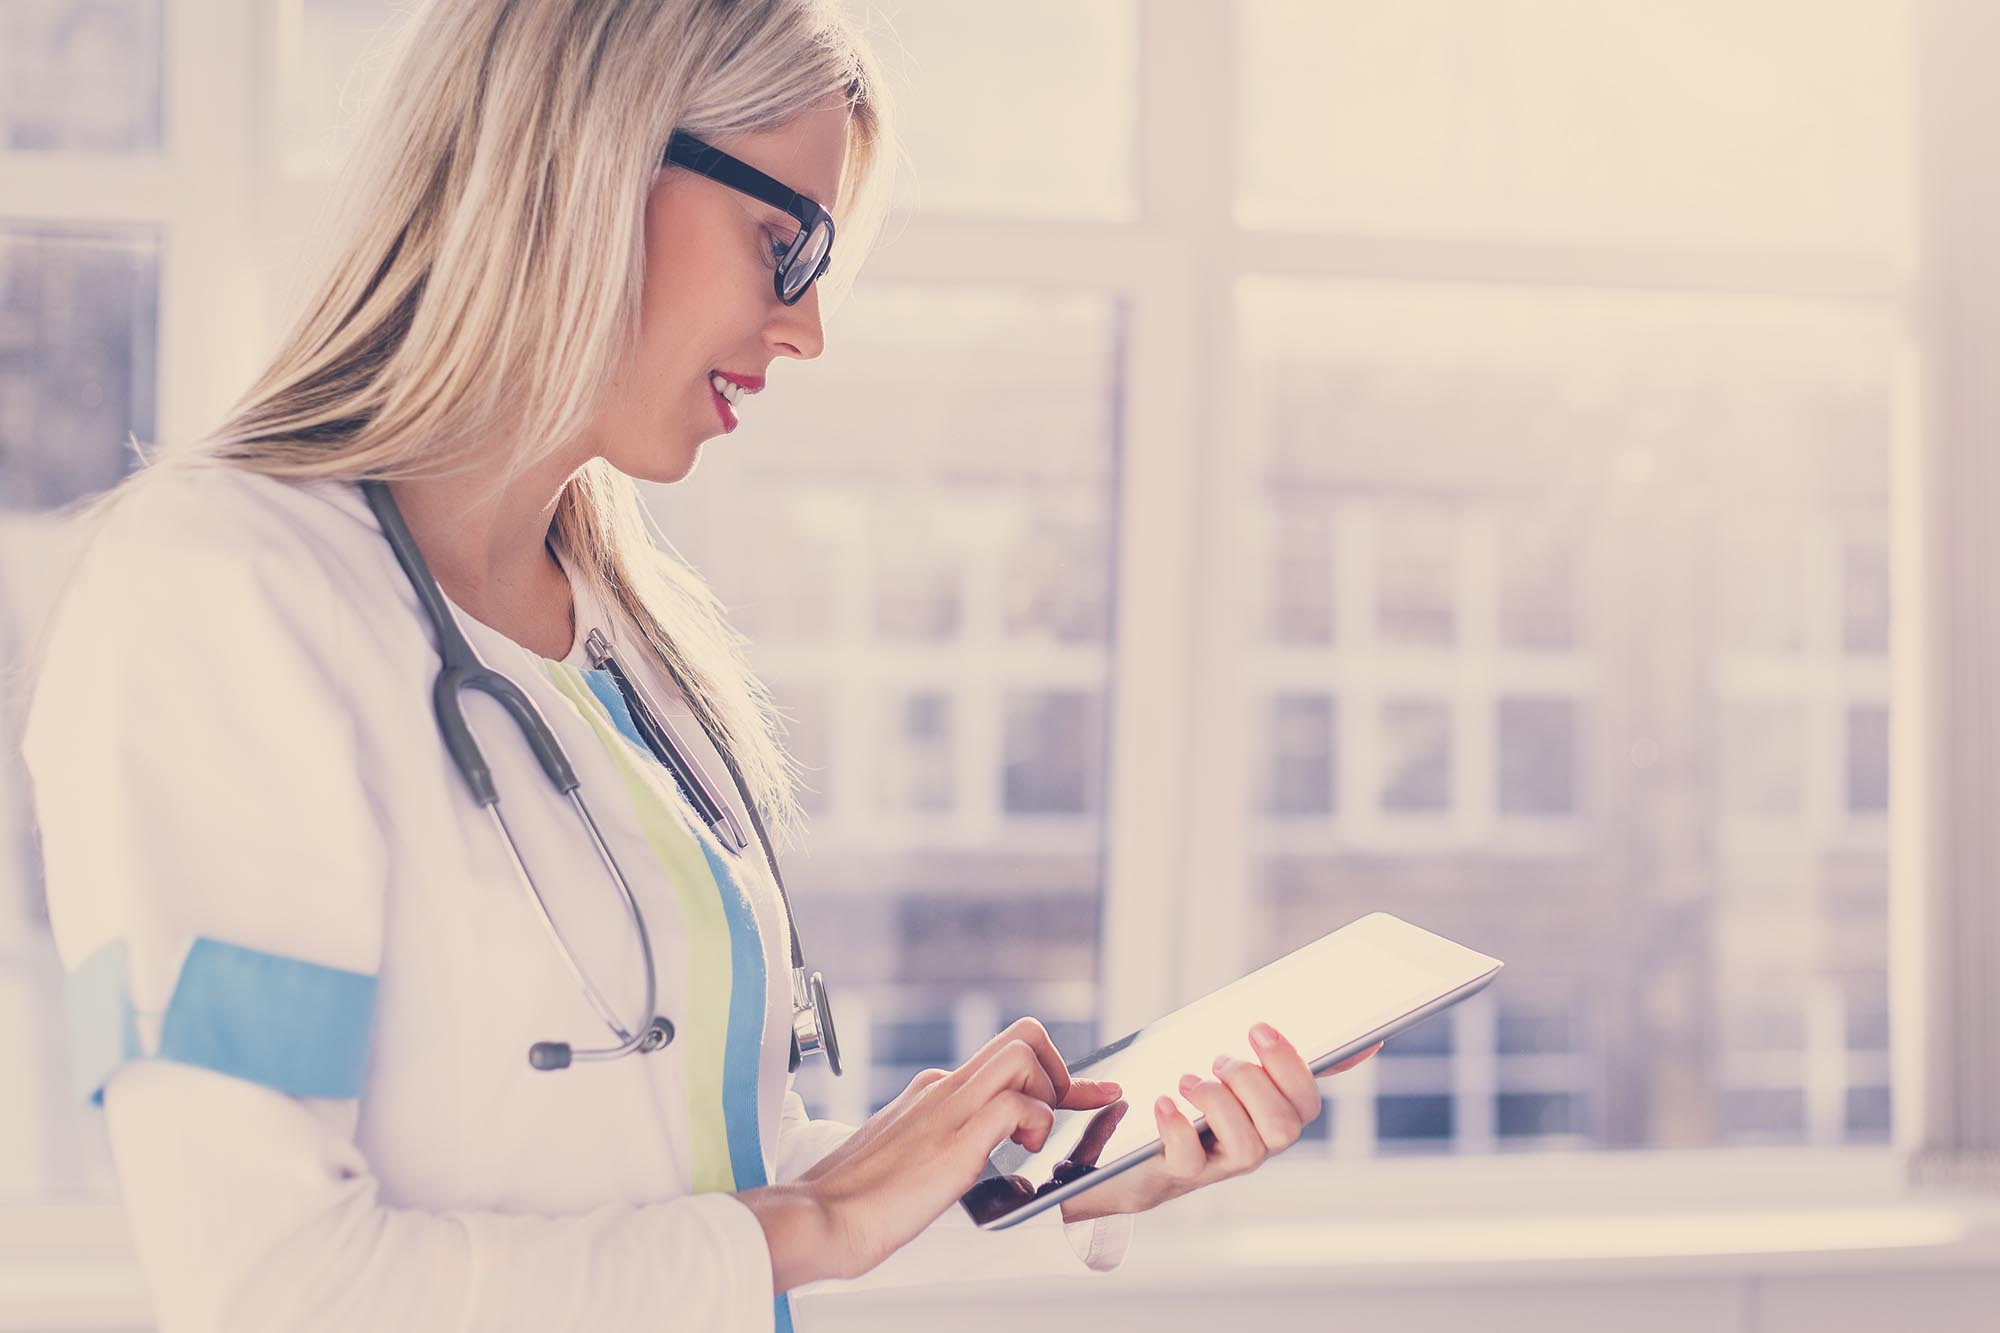 4 ways Doctors are Using iPads on Hospital Wireless Networks